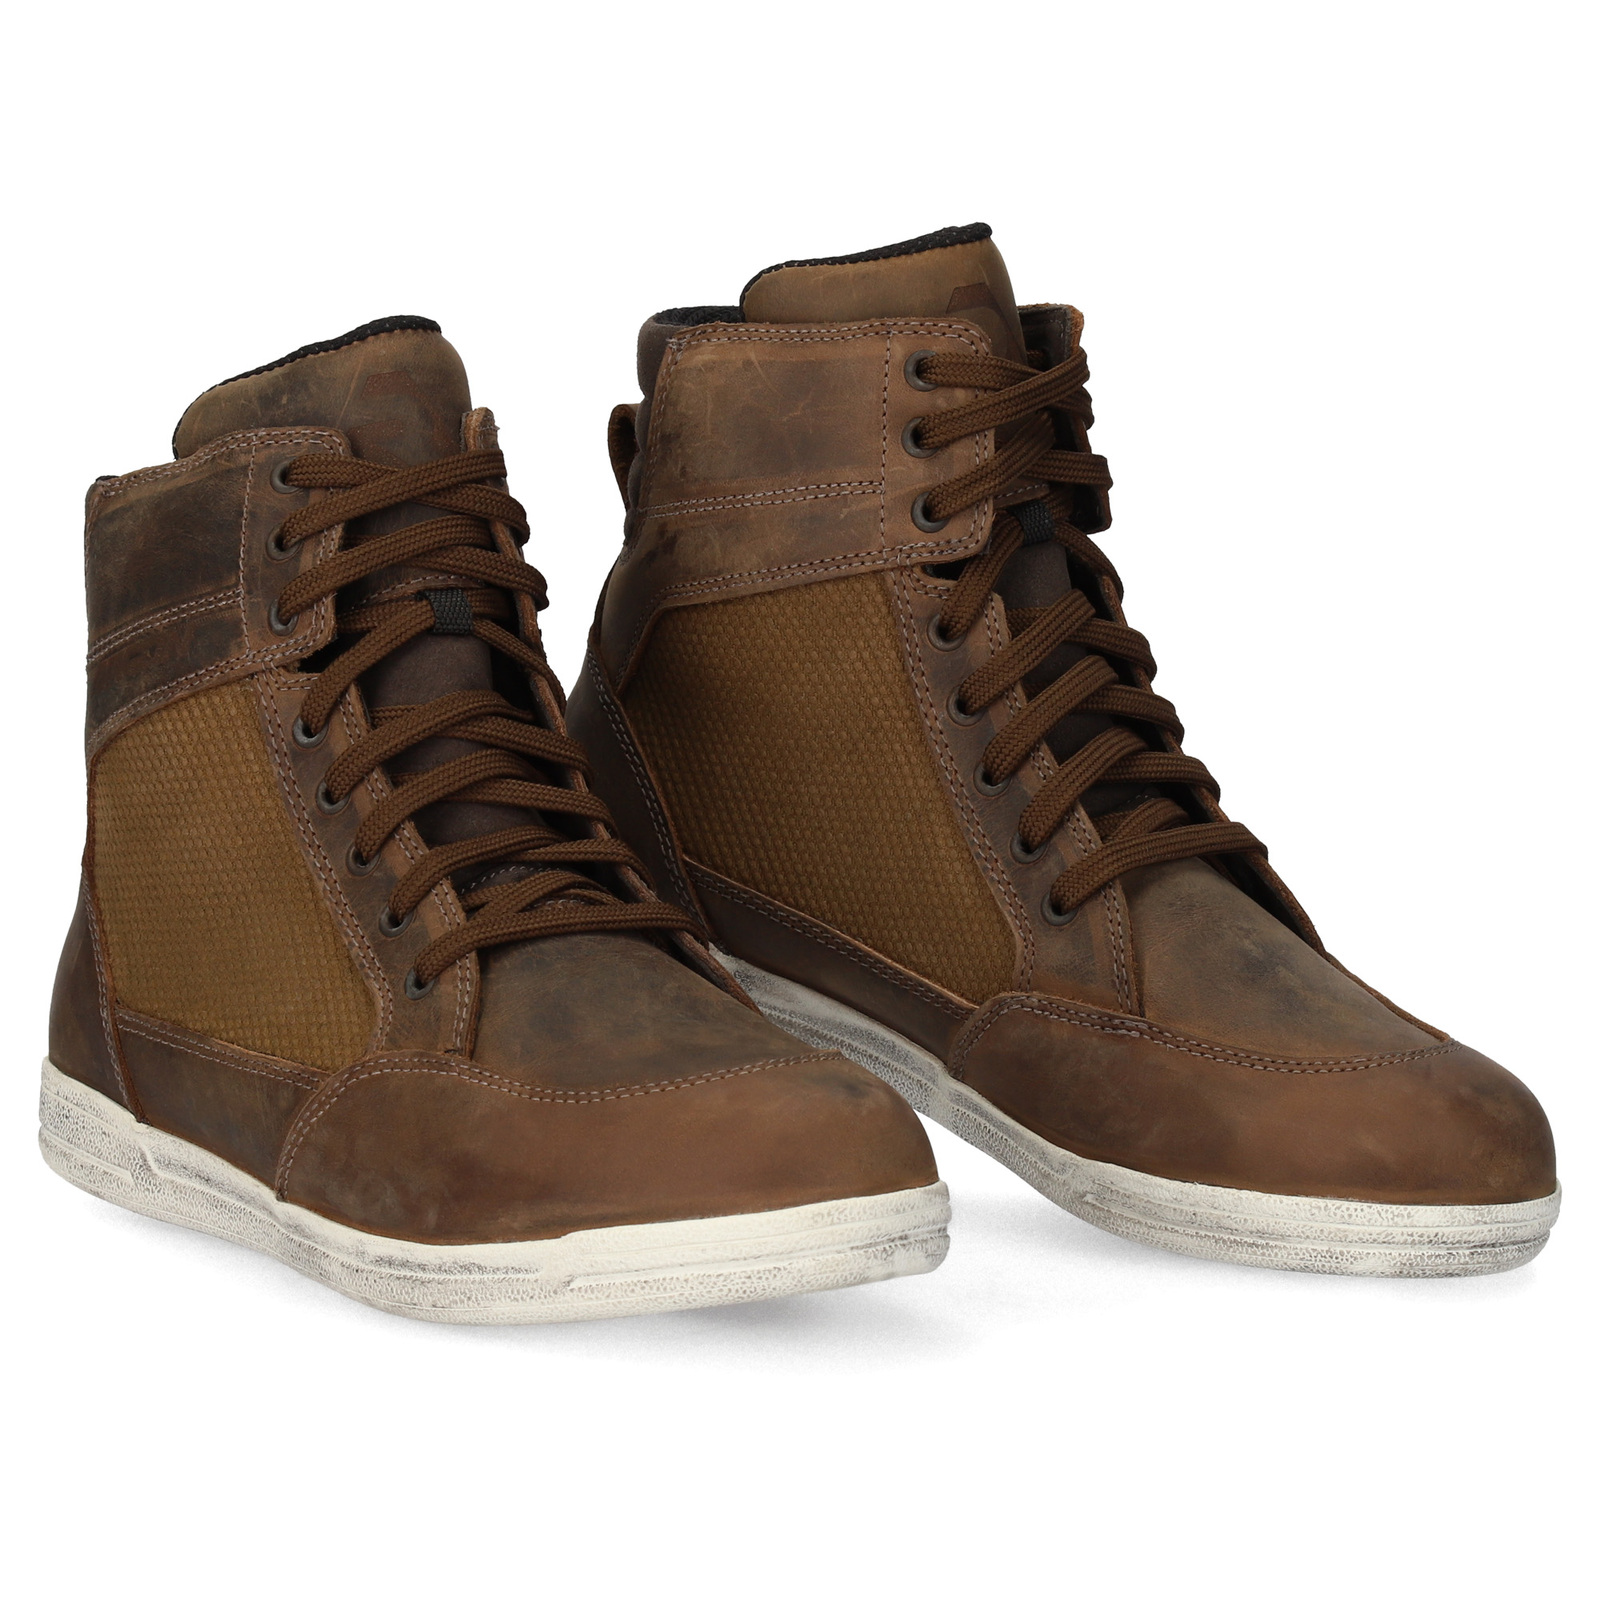 ARGON DIVISION BOOT BROWN - 40 